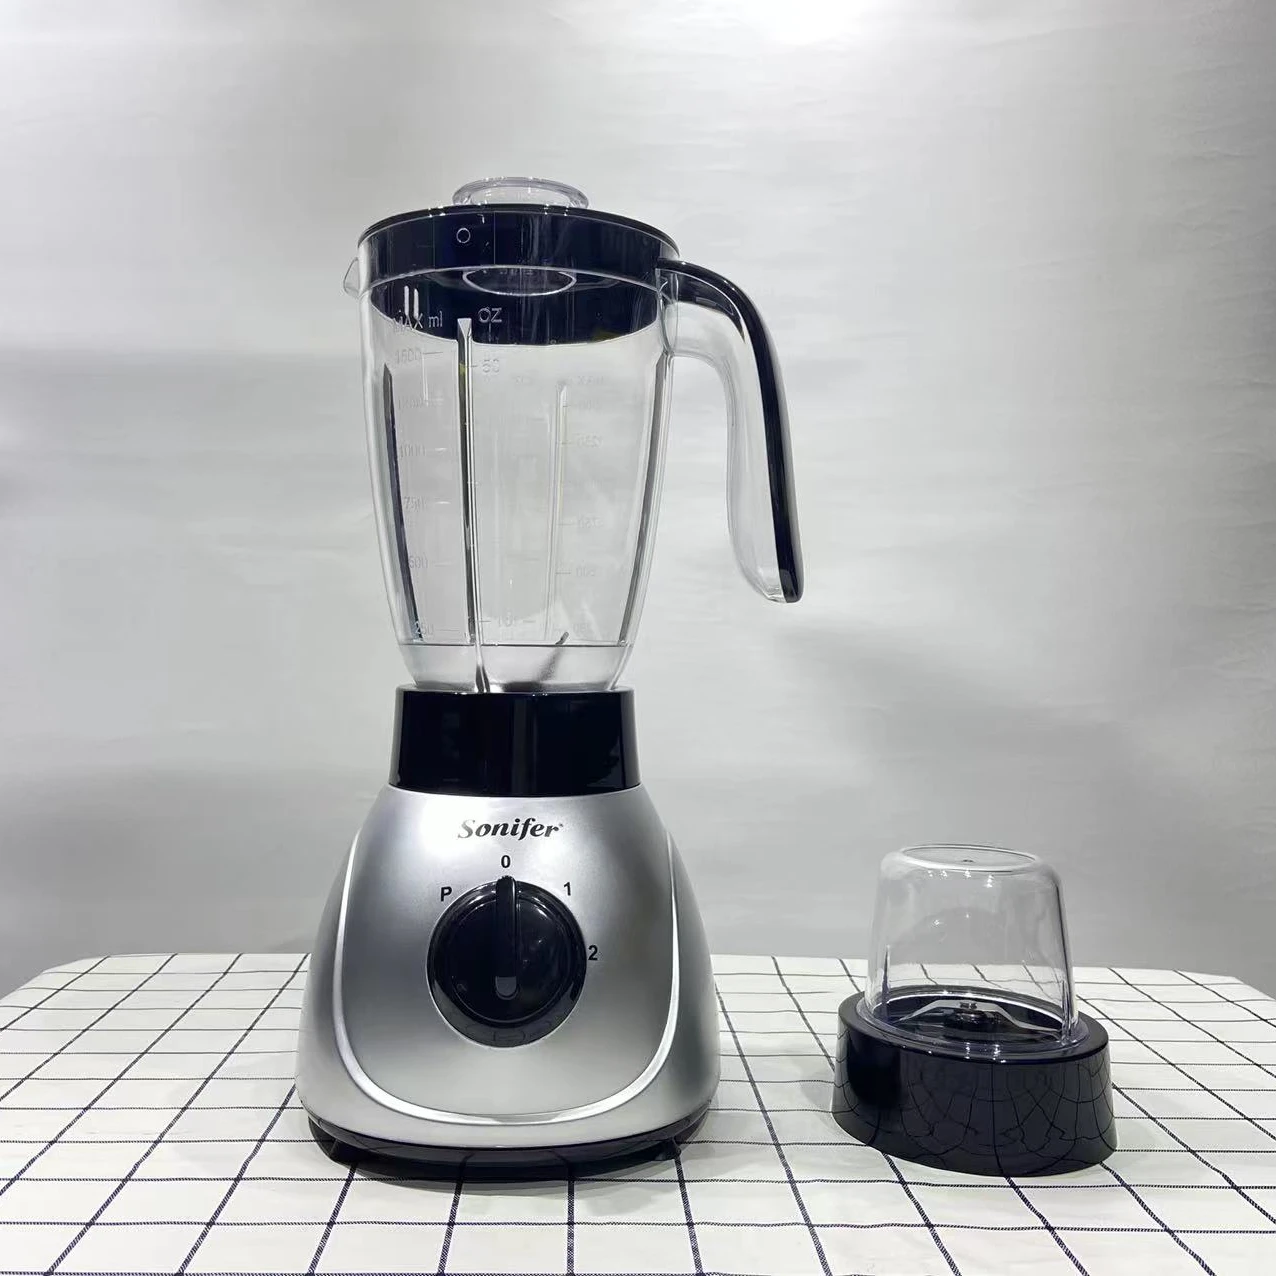 Source Sonifer SF-8061 appliances high quality multi function electric plastic jar 2 in 1 grinder parts on m.alibaba.com